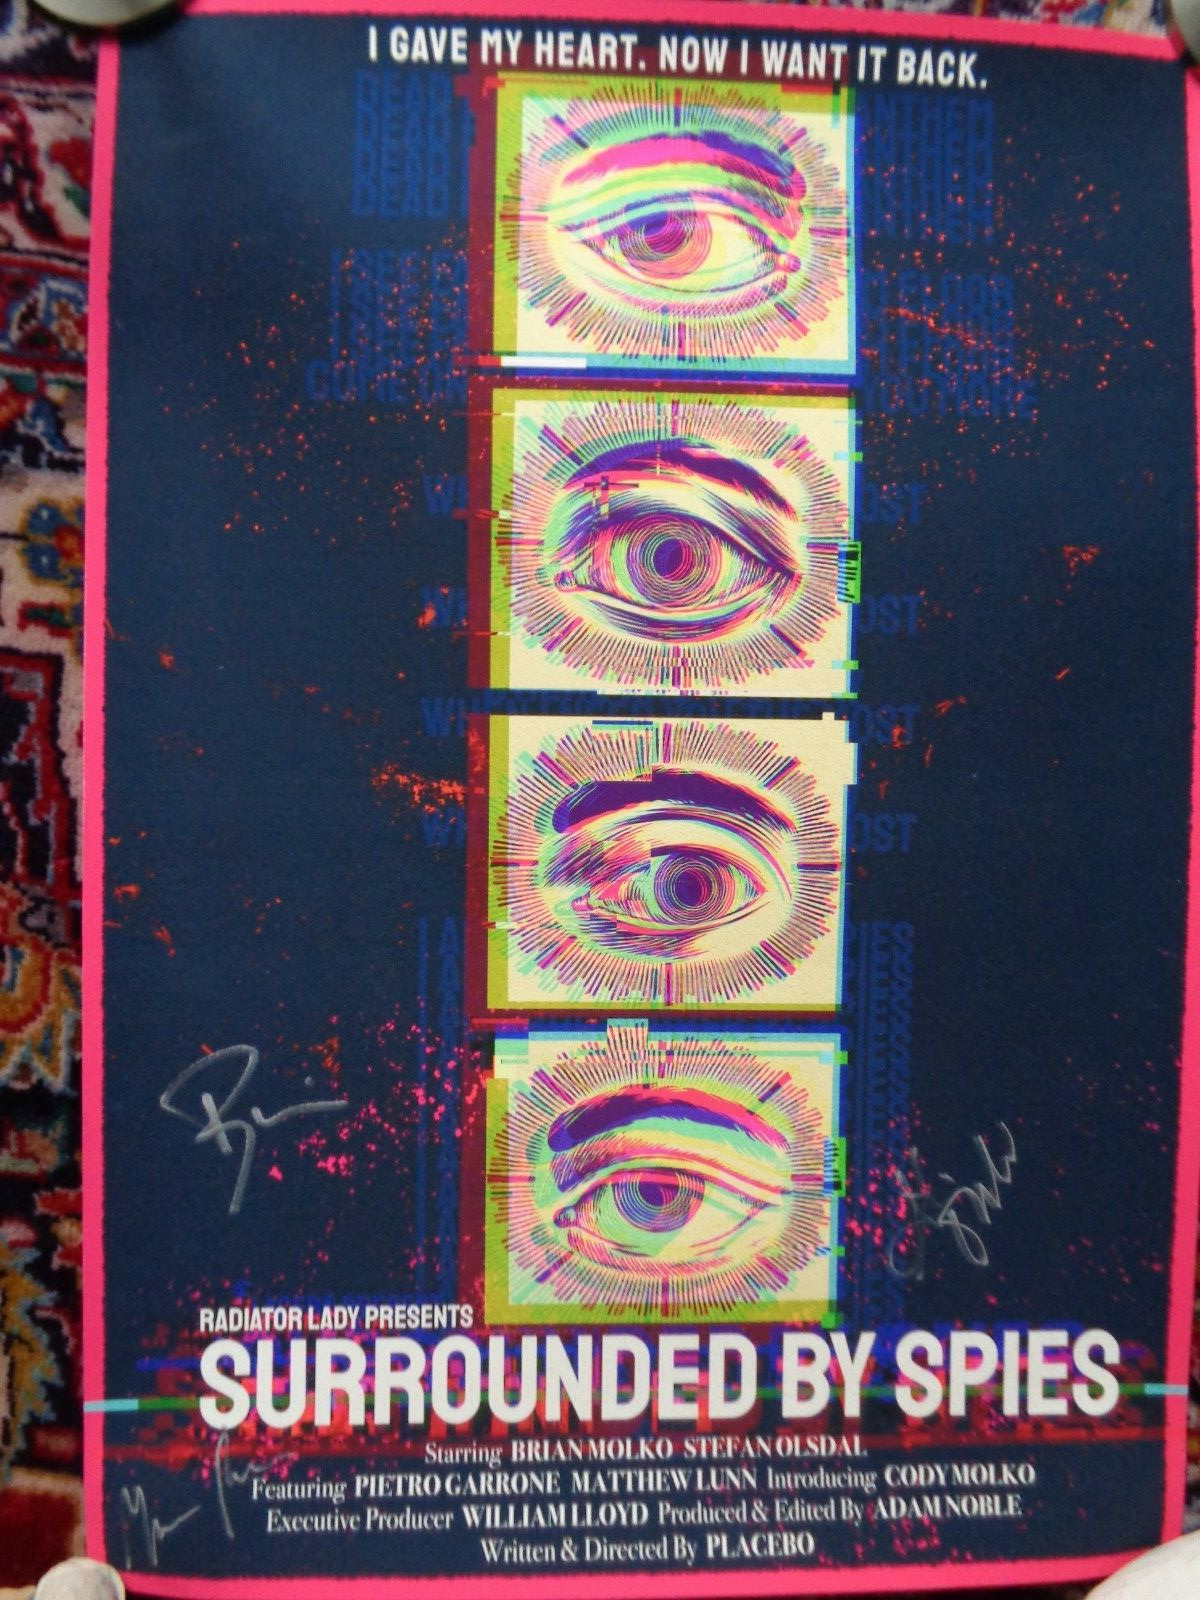 PLACEBO AUTOGRAPHS SURROUNDED BY SPIES EYES POSTER - LTD ONLY 250 SIGNED COPIES